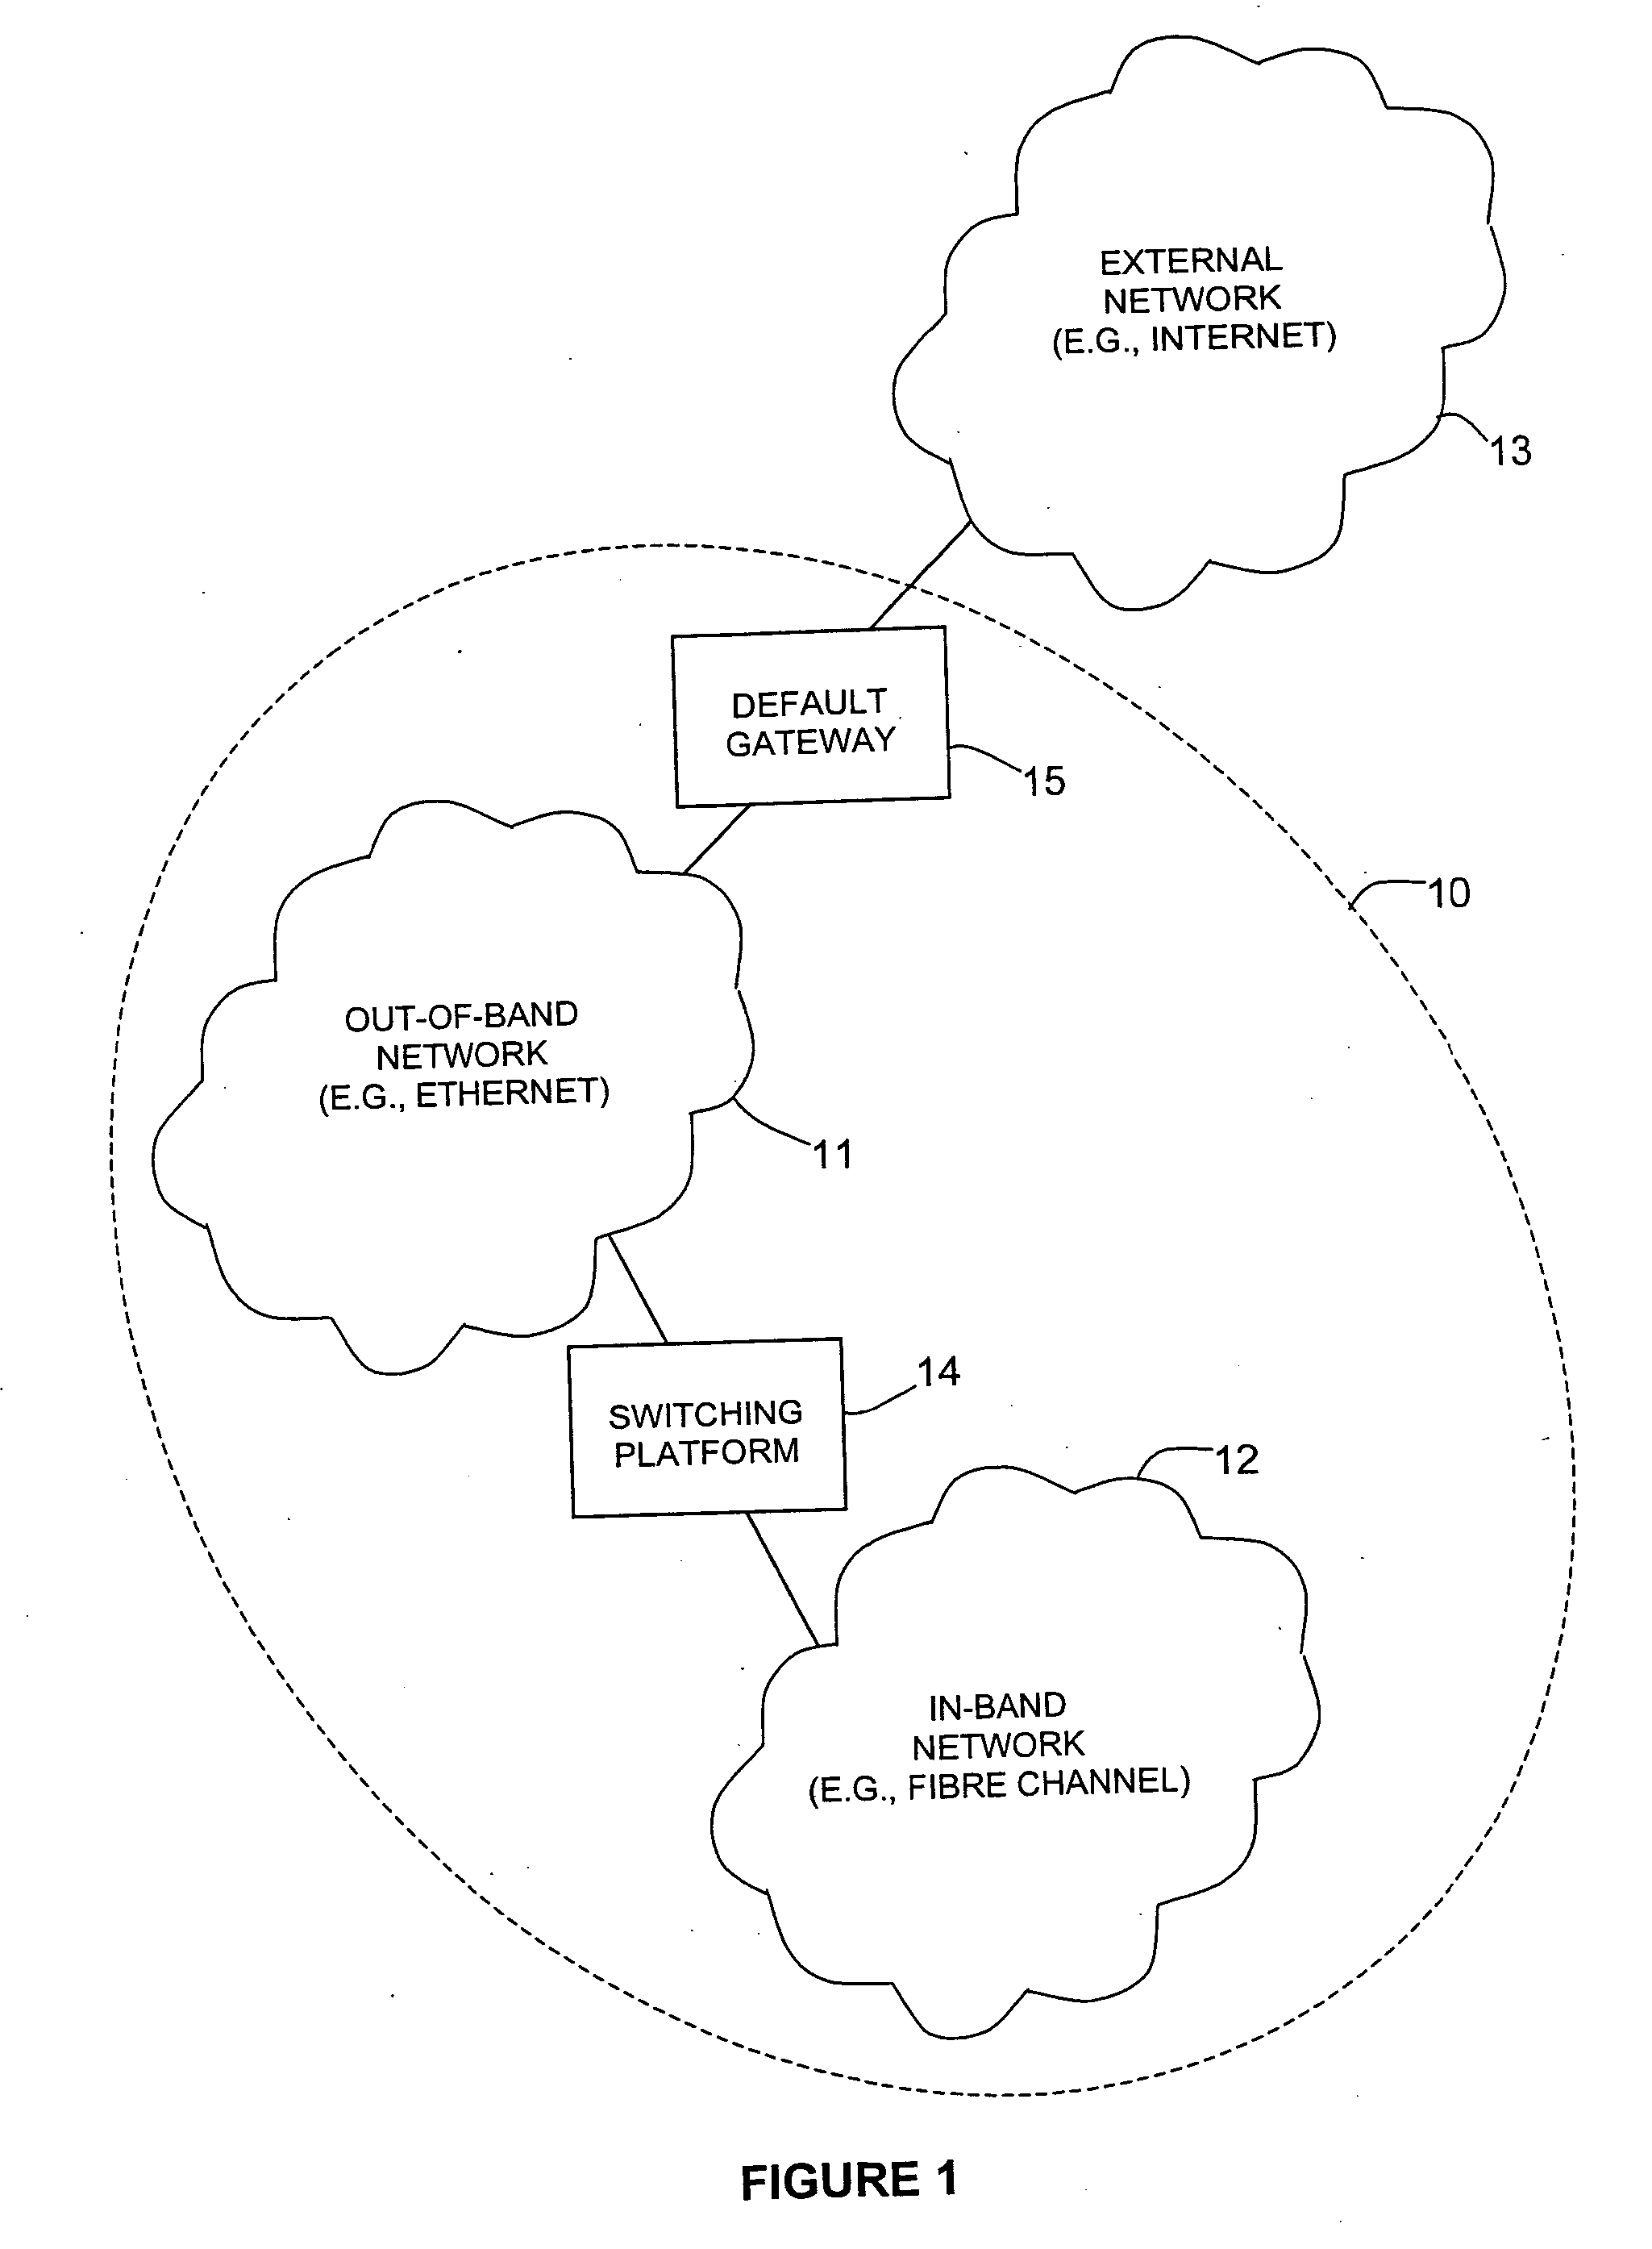 System and method for routing data across heterogeneous private and non-private networks